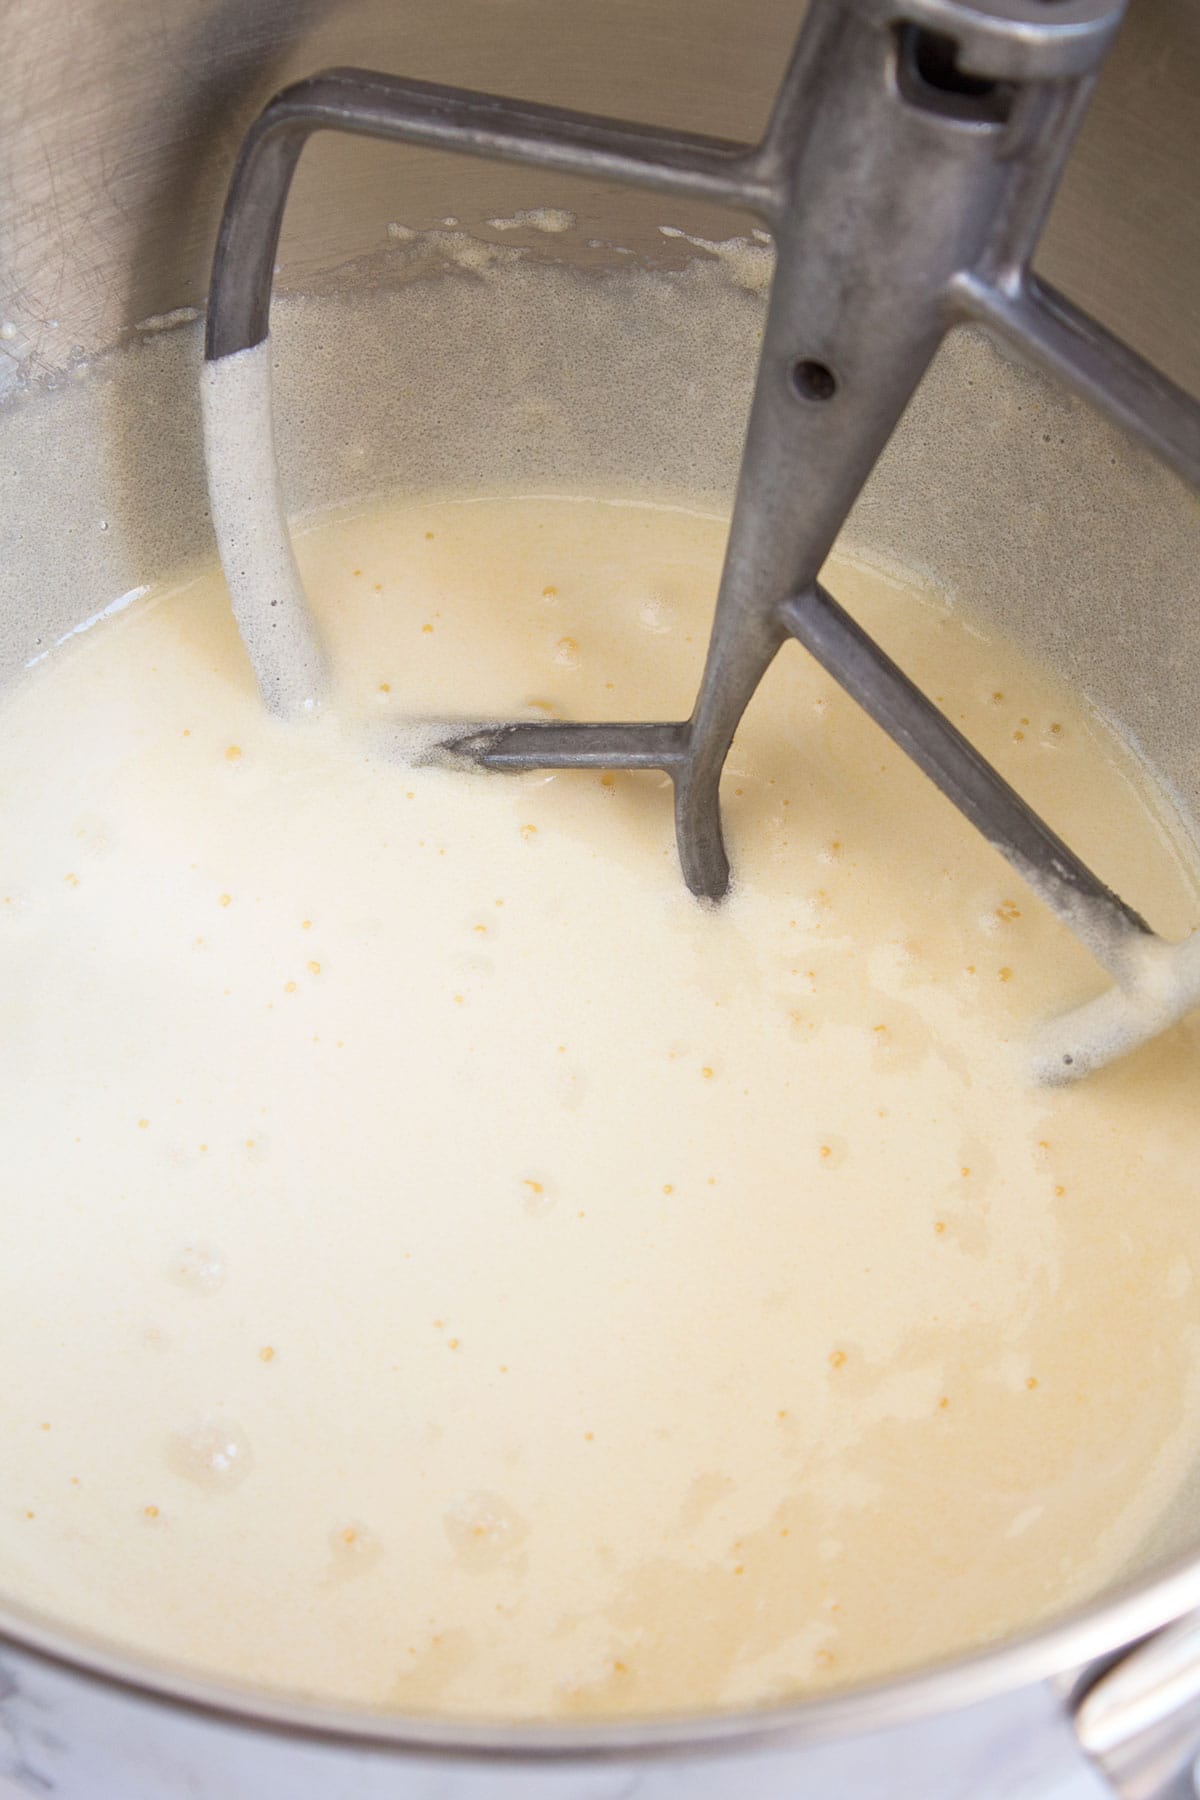 Eggs and sugar whipped together in a stand mixer.